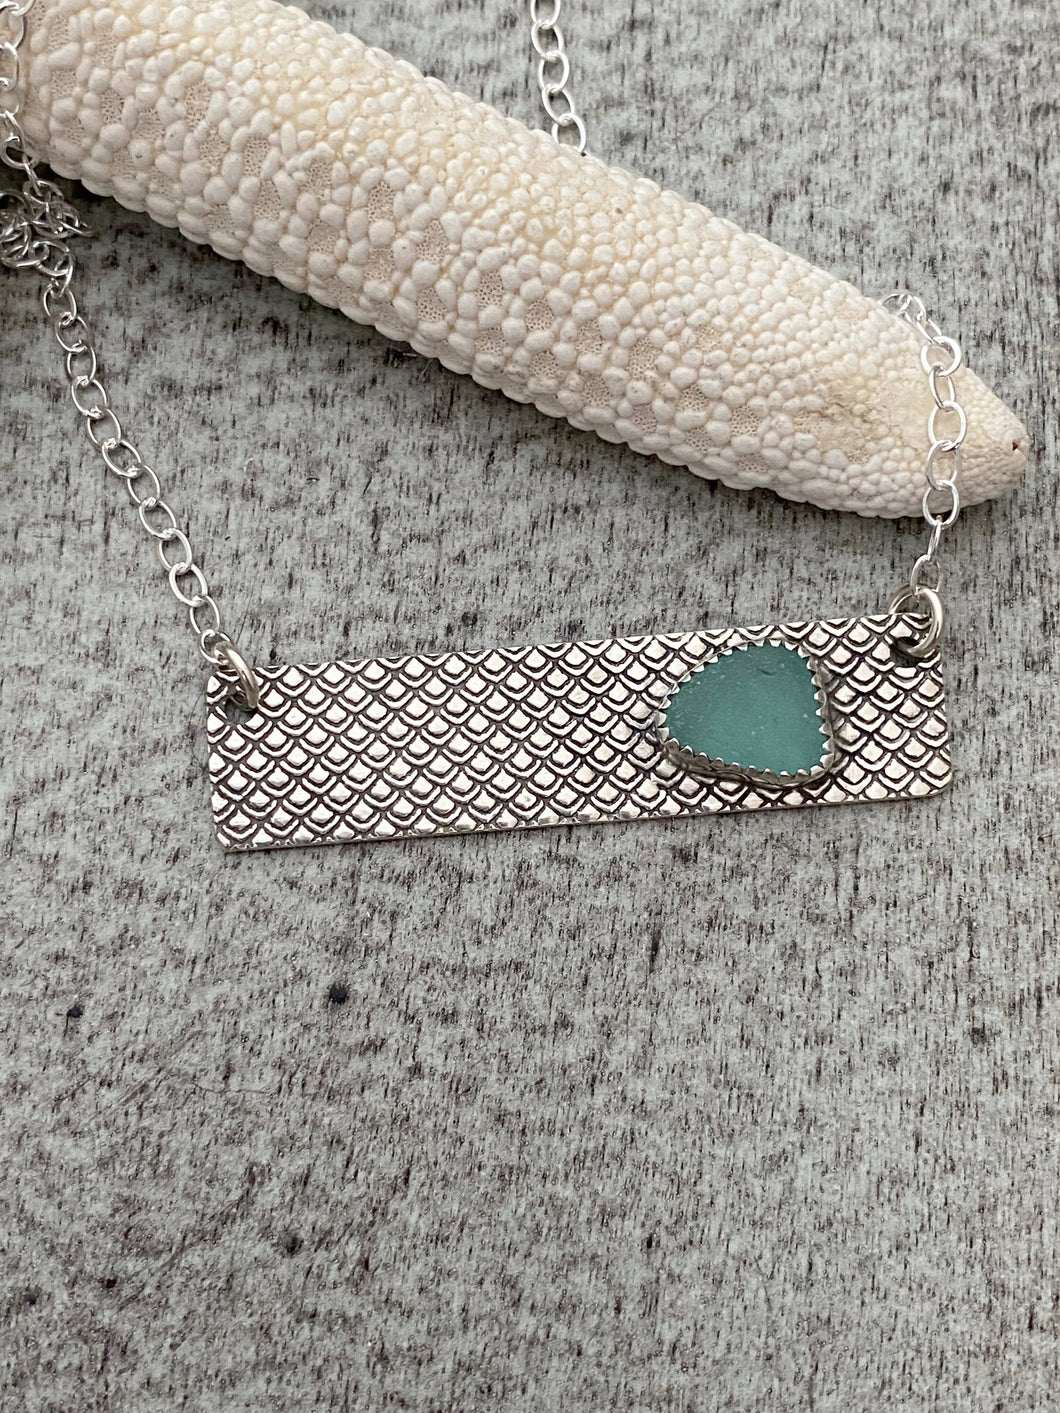 Mermaid scale bar necklace with teal sea glass